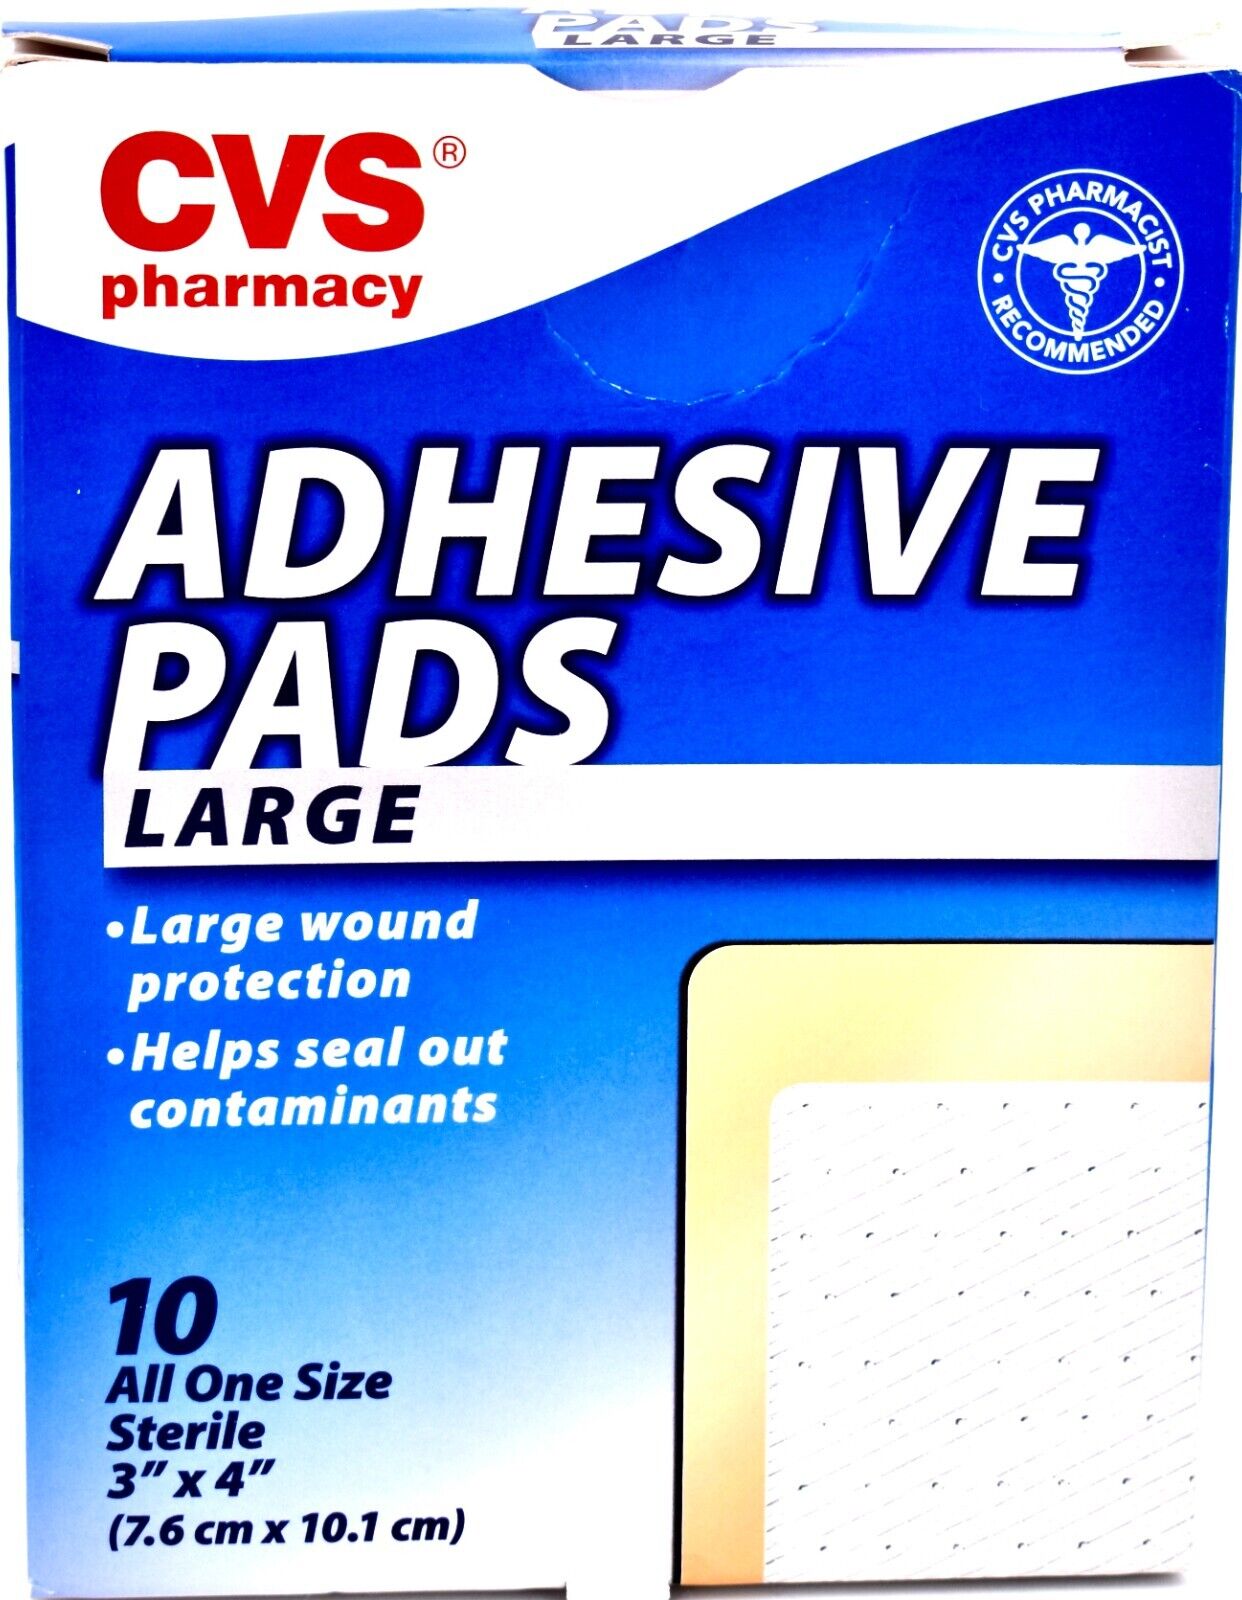 CVS Adhesive Pads,10 Large Pads,Large Wound Protection,Sterile,Beige,3